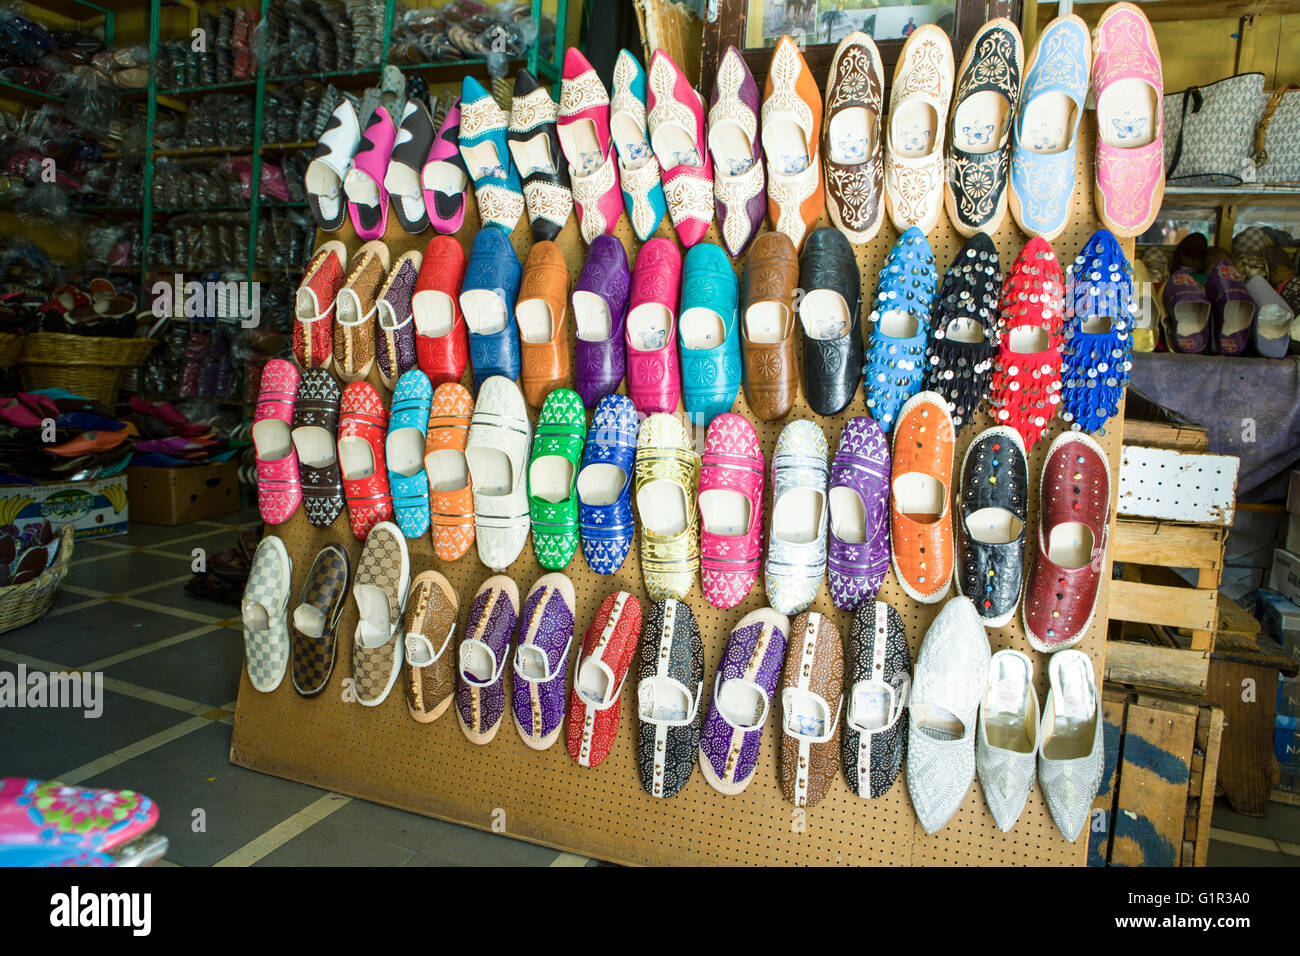 Shoe shop full of leather color shoes at market Tangier, Morocco Stock